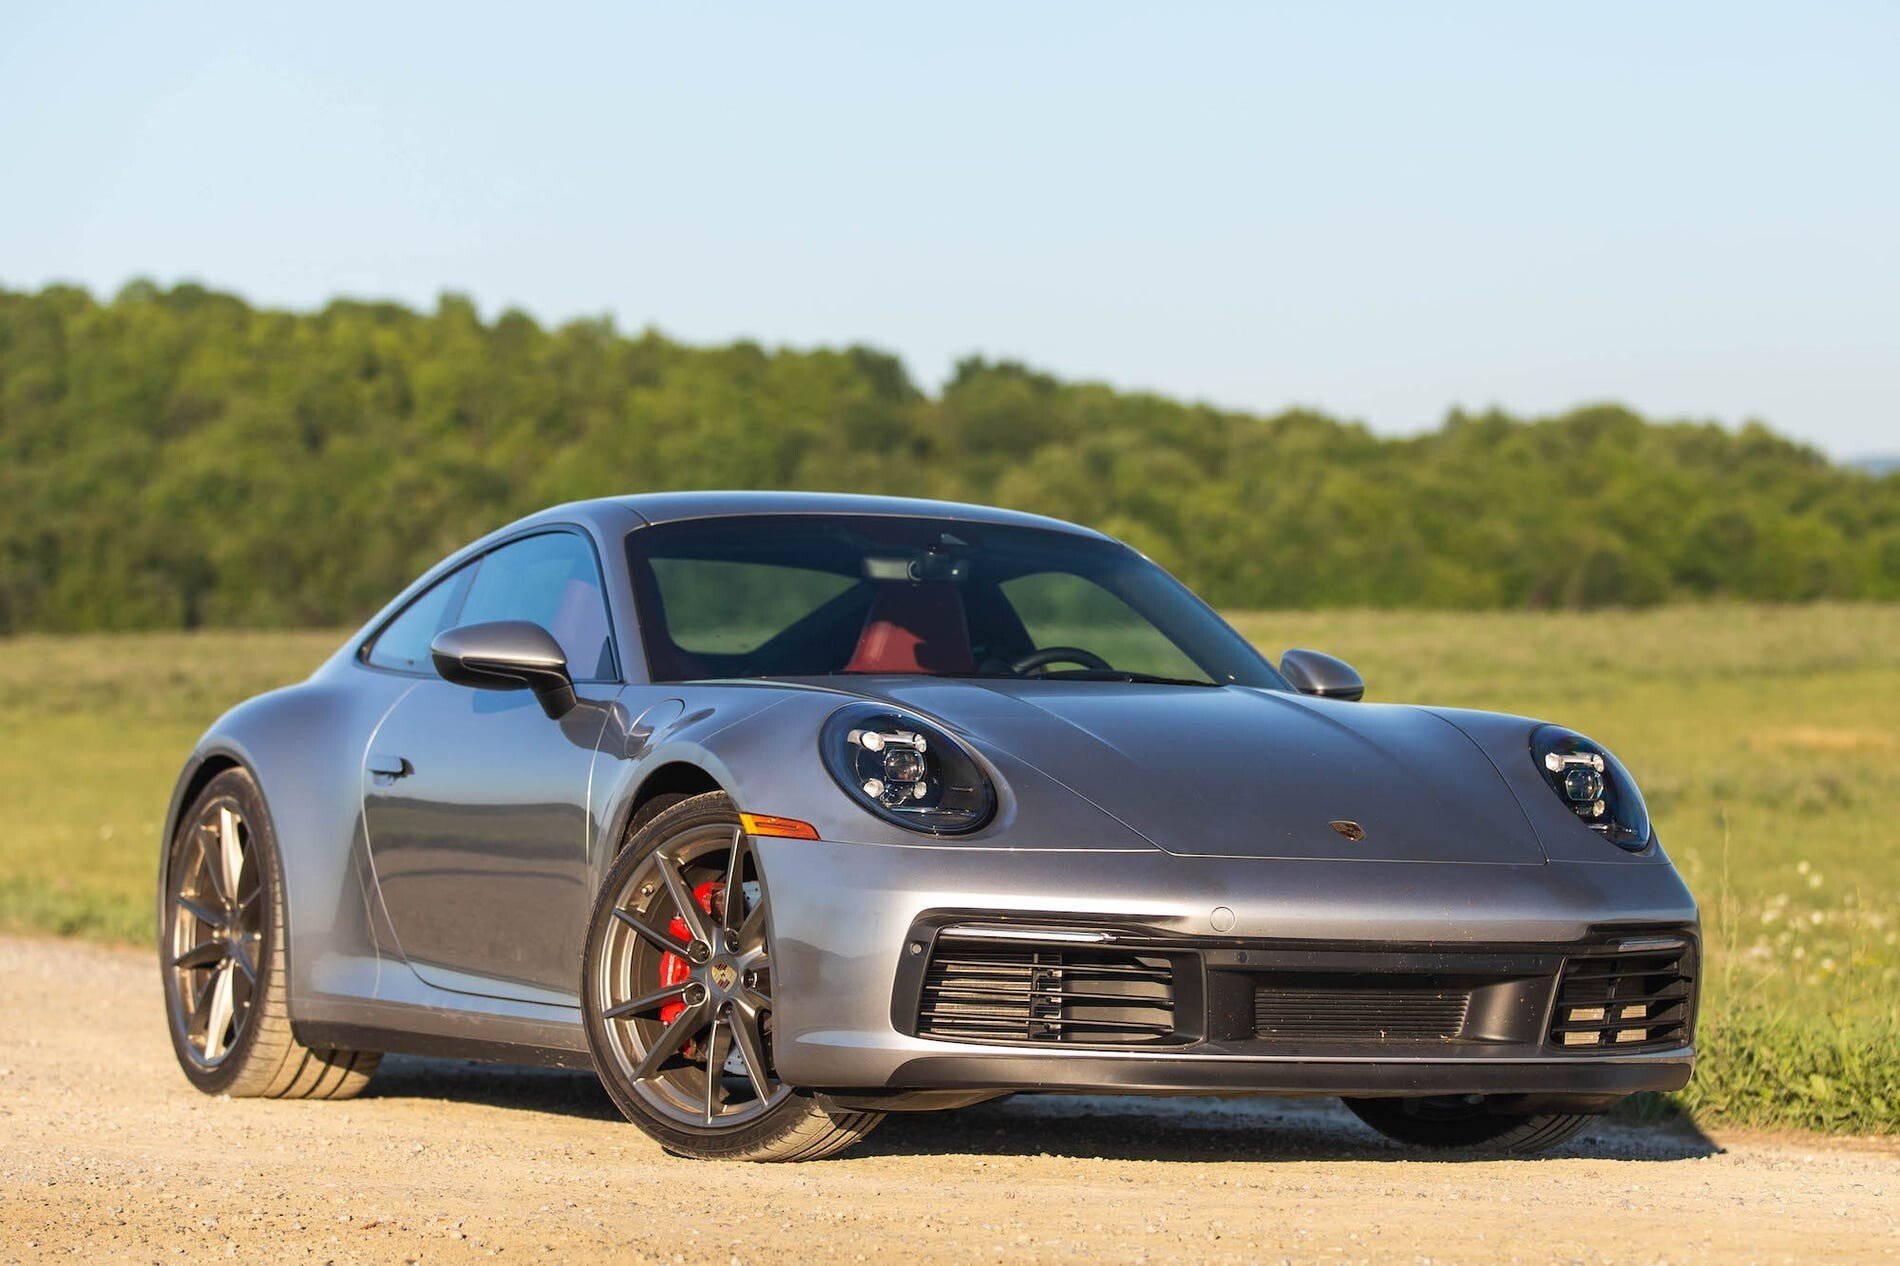 Loved by purists for 60 years, the 2020 Porsche 911 Carrera S lives up to its heritage. Photo: Business Insider